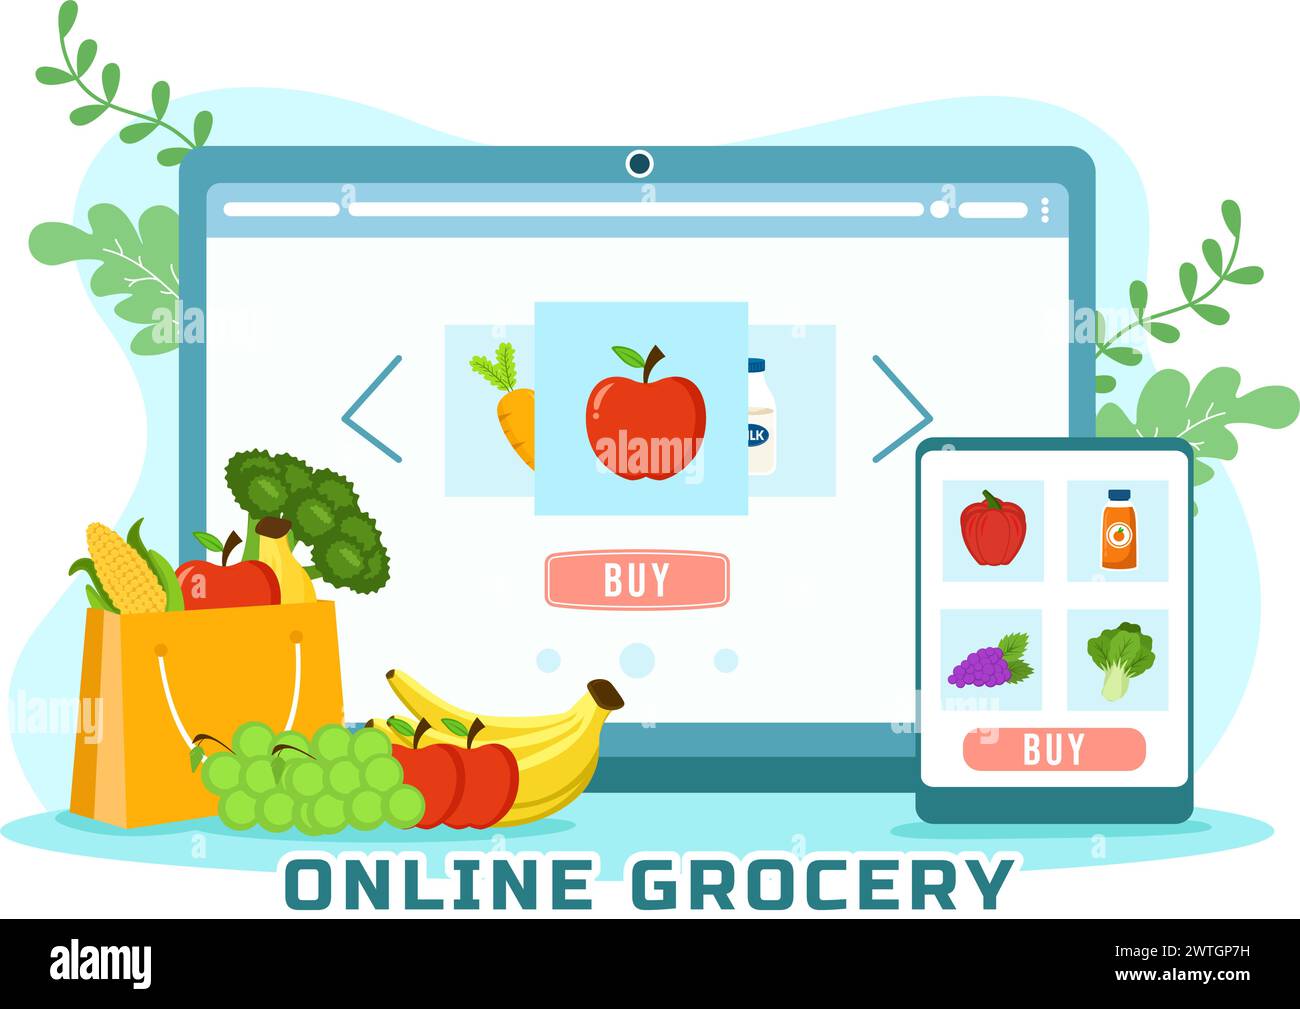 Online Grocery Store Vector Illustration with Food Product Shelves, Racks Dairy, Fruits and Drinks for Shopping Order via Telephone in Background Stock Vector